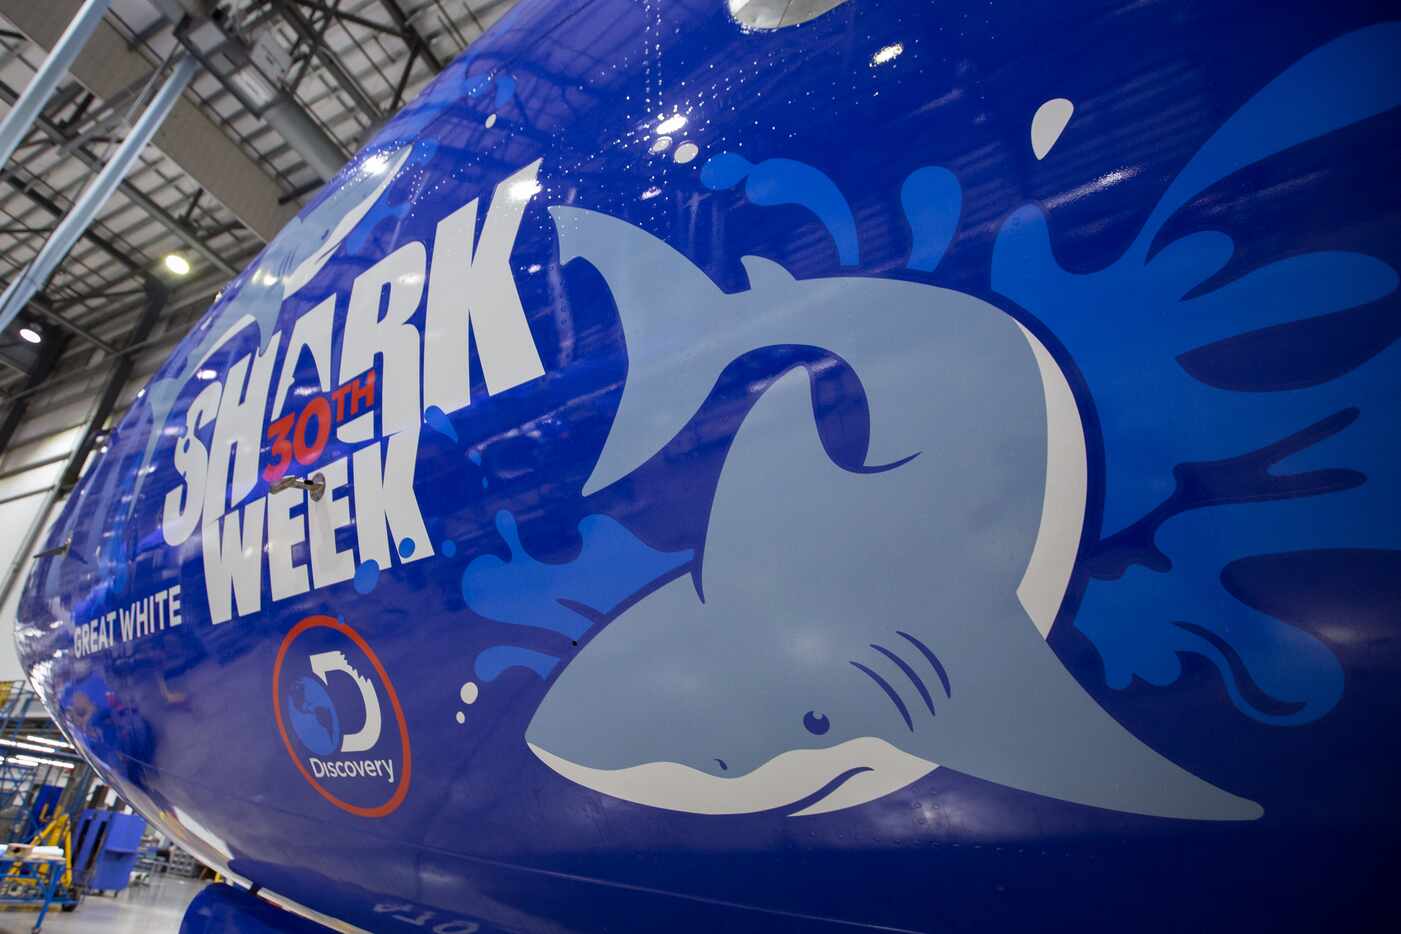 Southwest Airlines unveils a specialty aircraft to celebrate Shark Week.